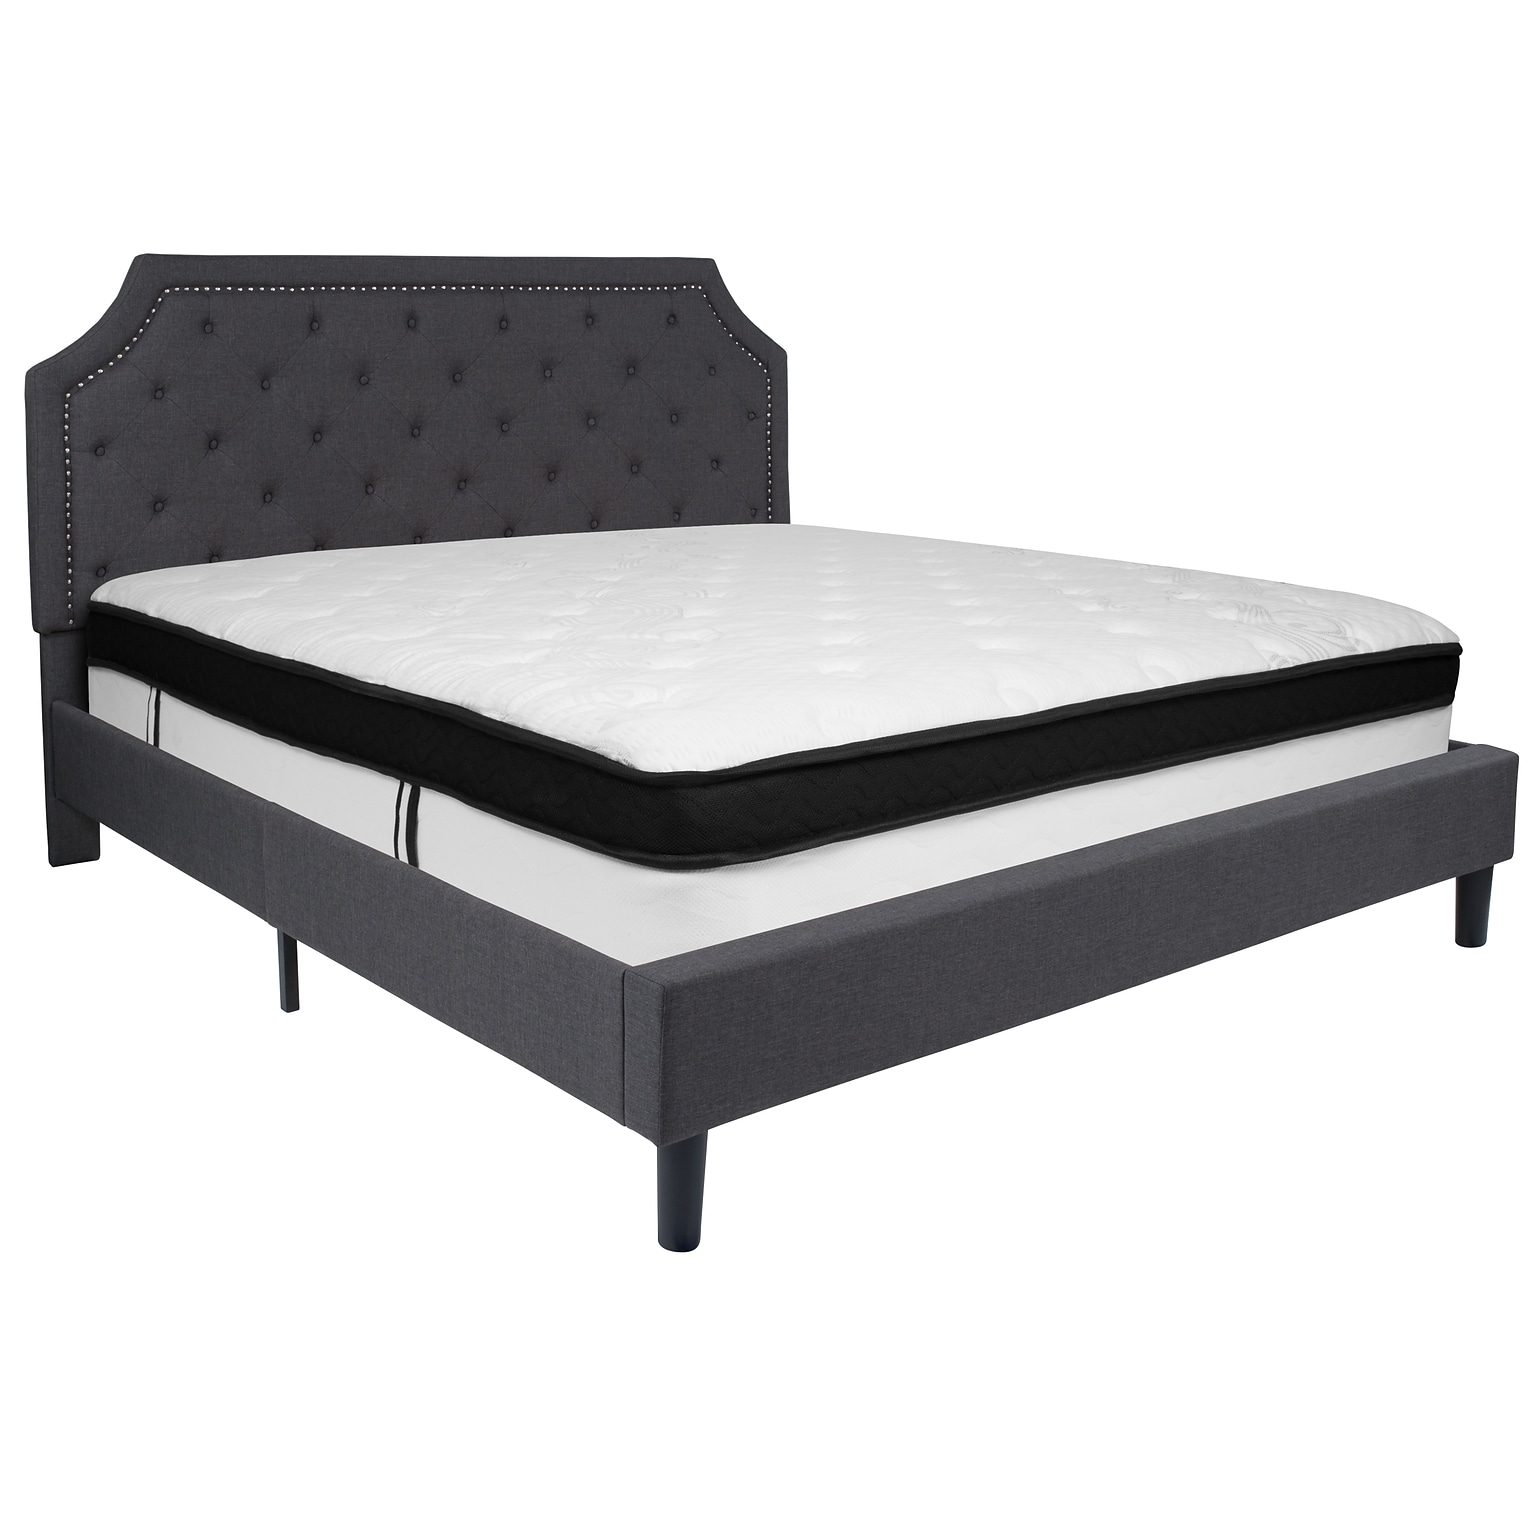 Flash Furniture Brighton Tufted Upholstered Platform Bed in Dark Gray Fabric with Memory Foam Mattress, King (SLBMF16)